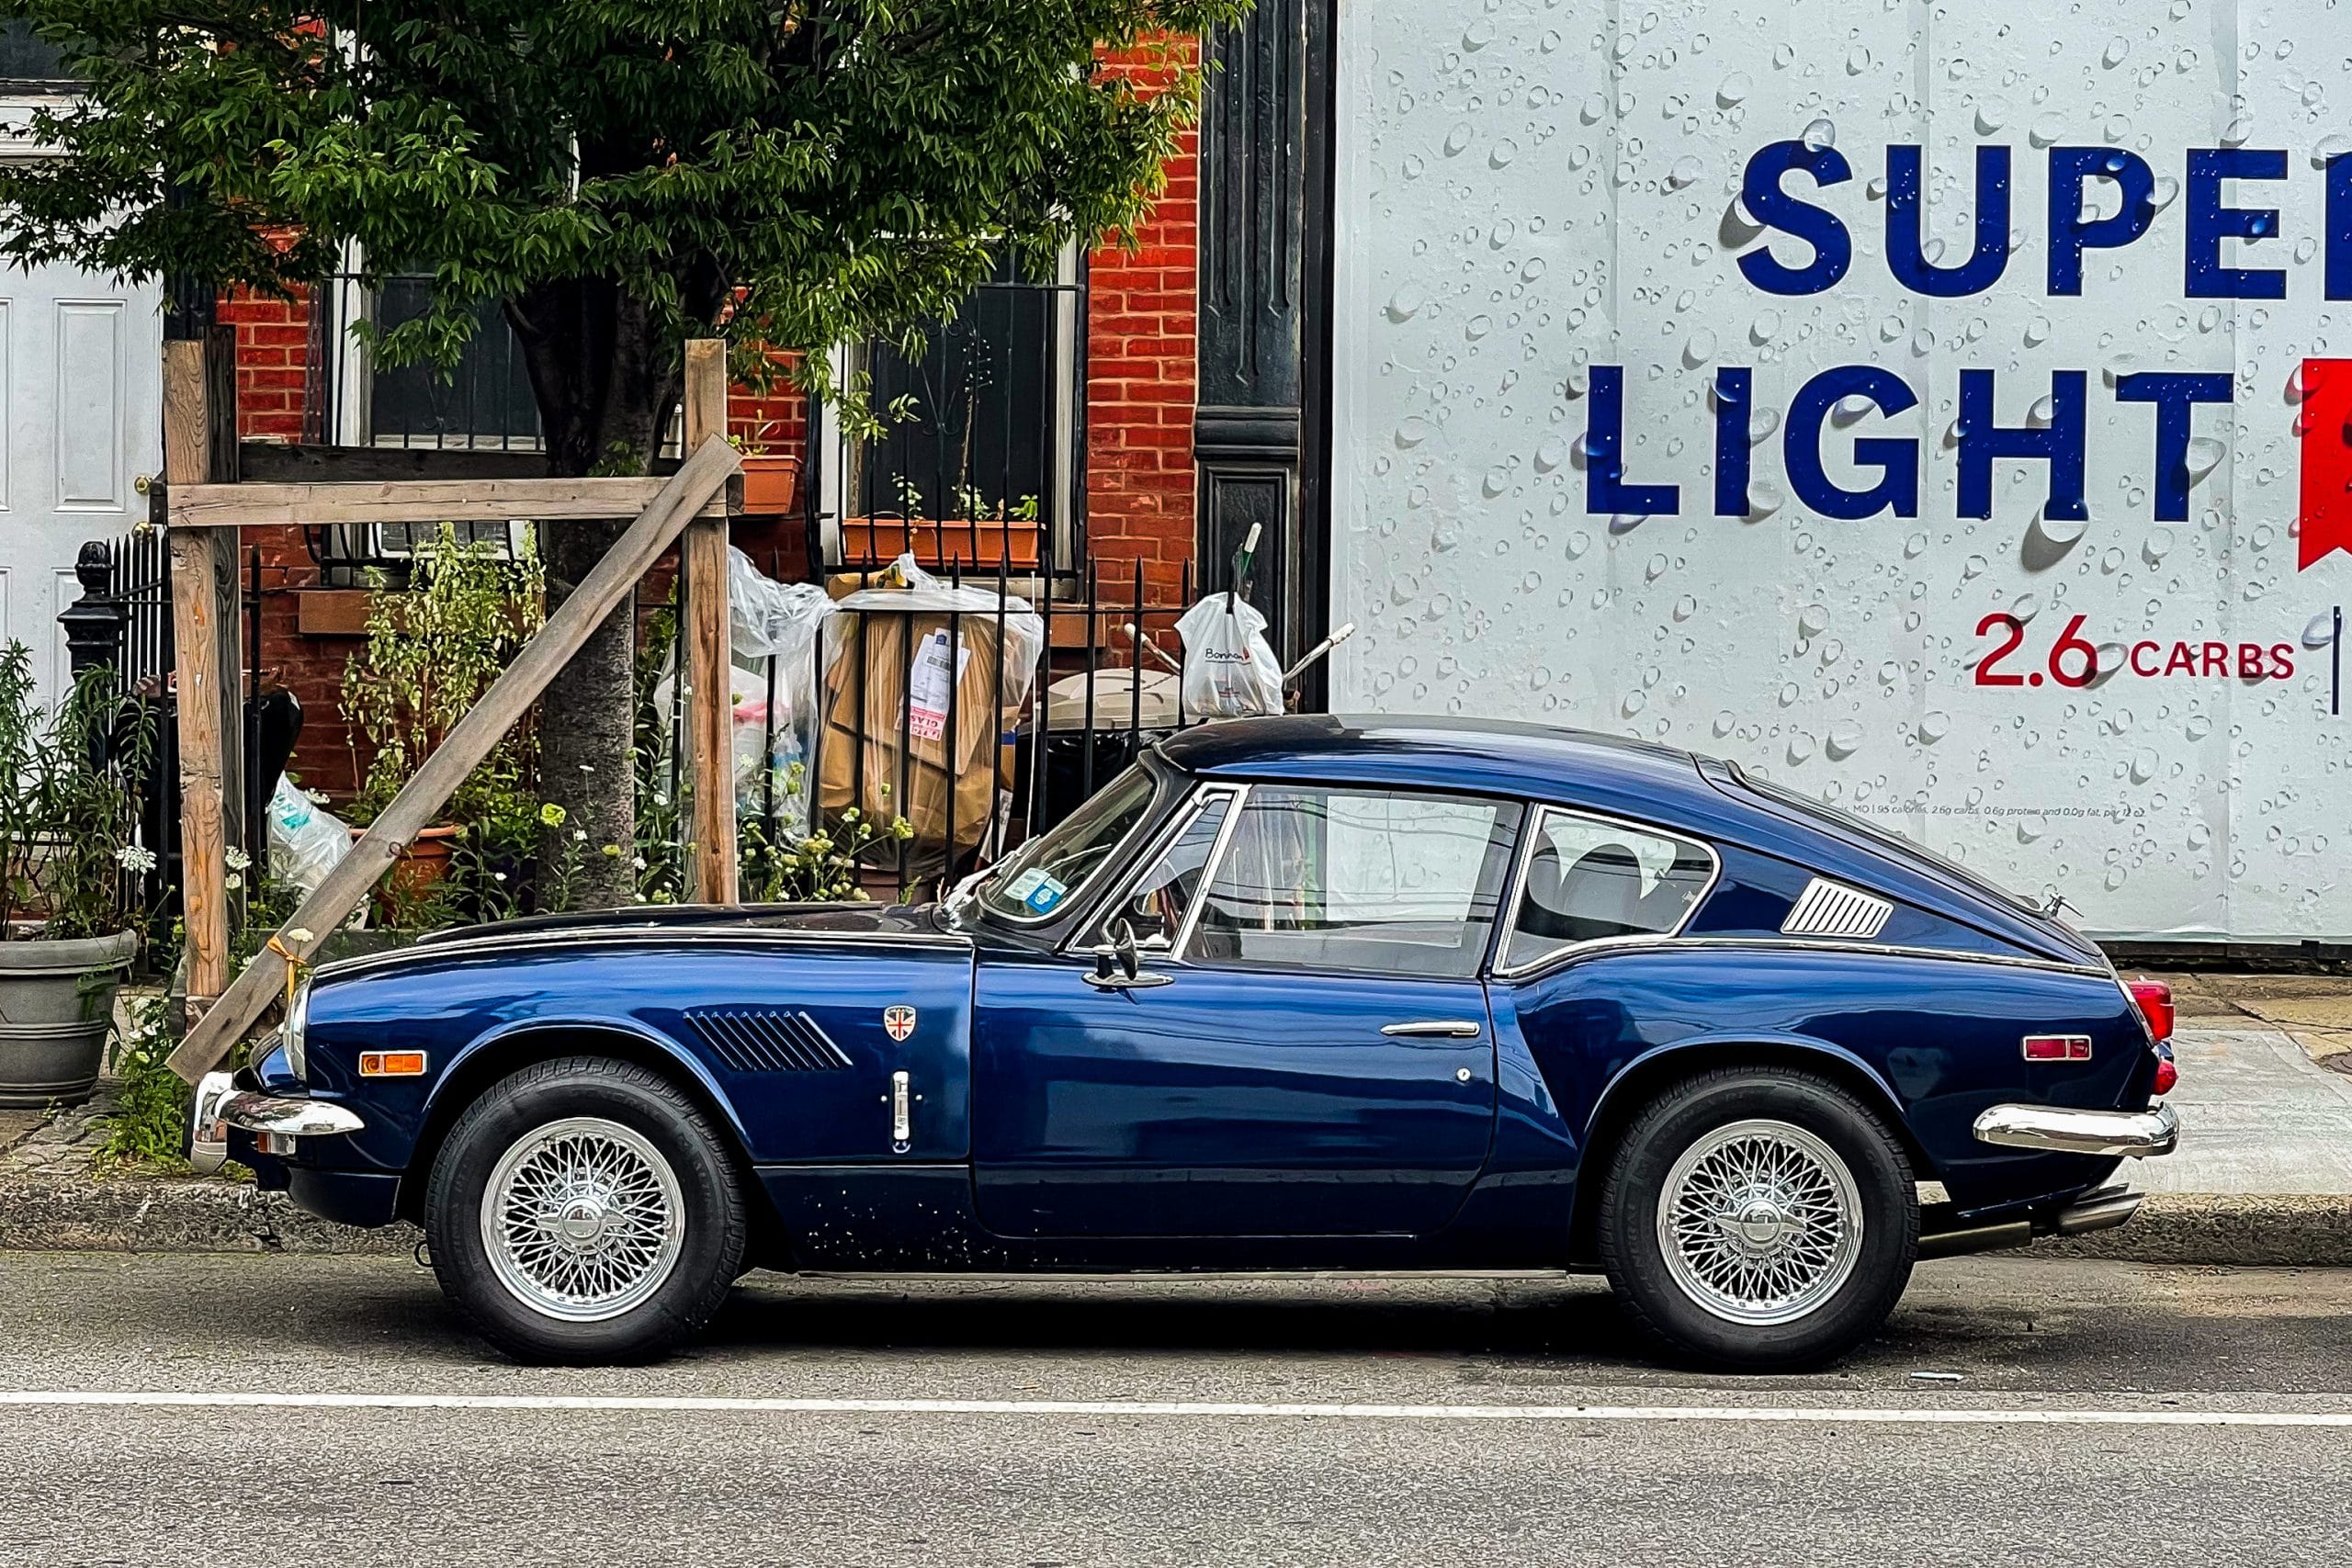 Photo of a vintage car in front of a billboard, by Dave Krugman